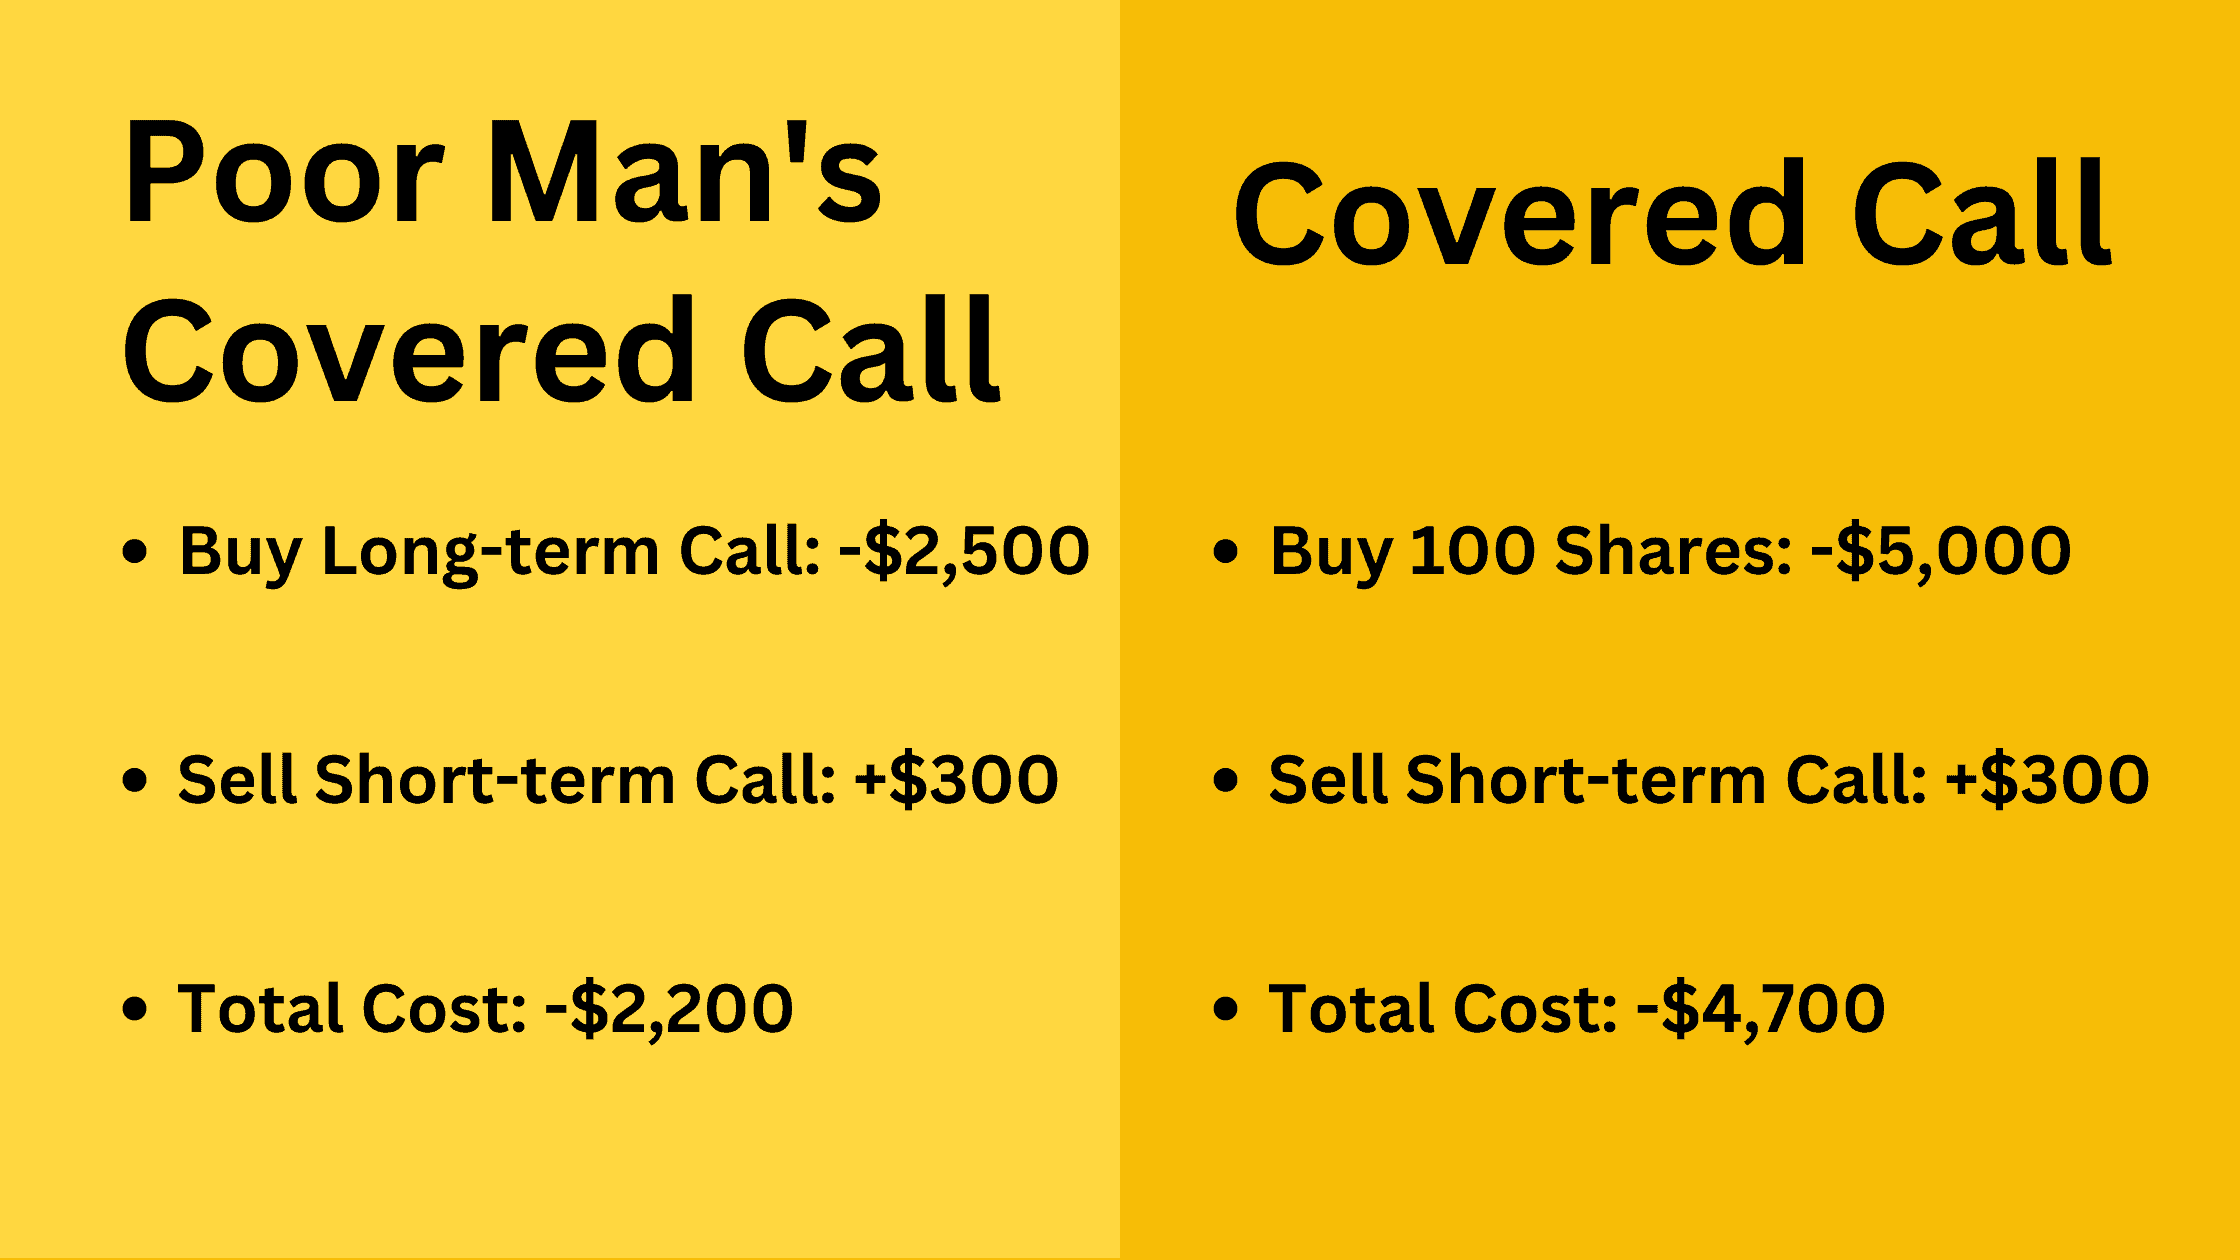 Cost Comparison Between Poor Man's Covered Call and Covered Call